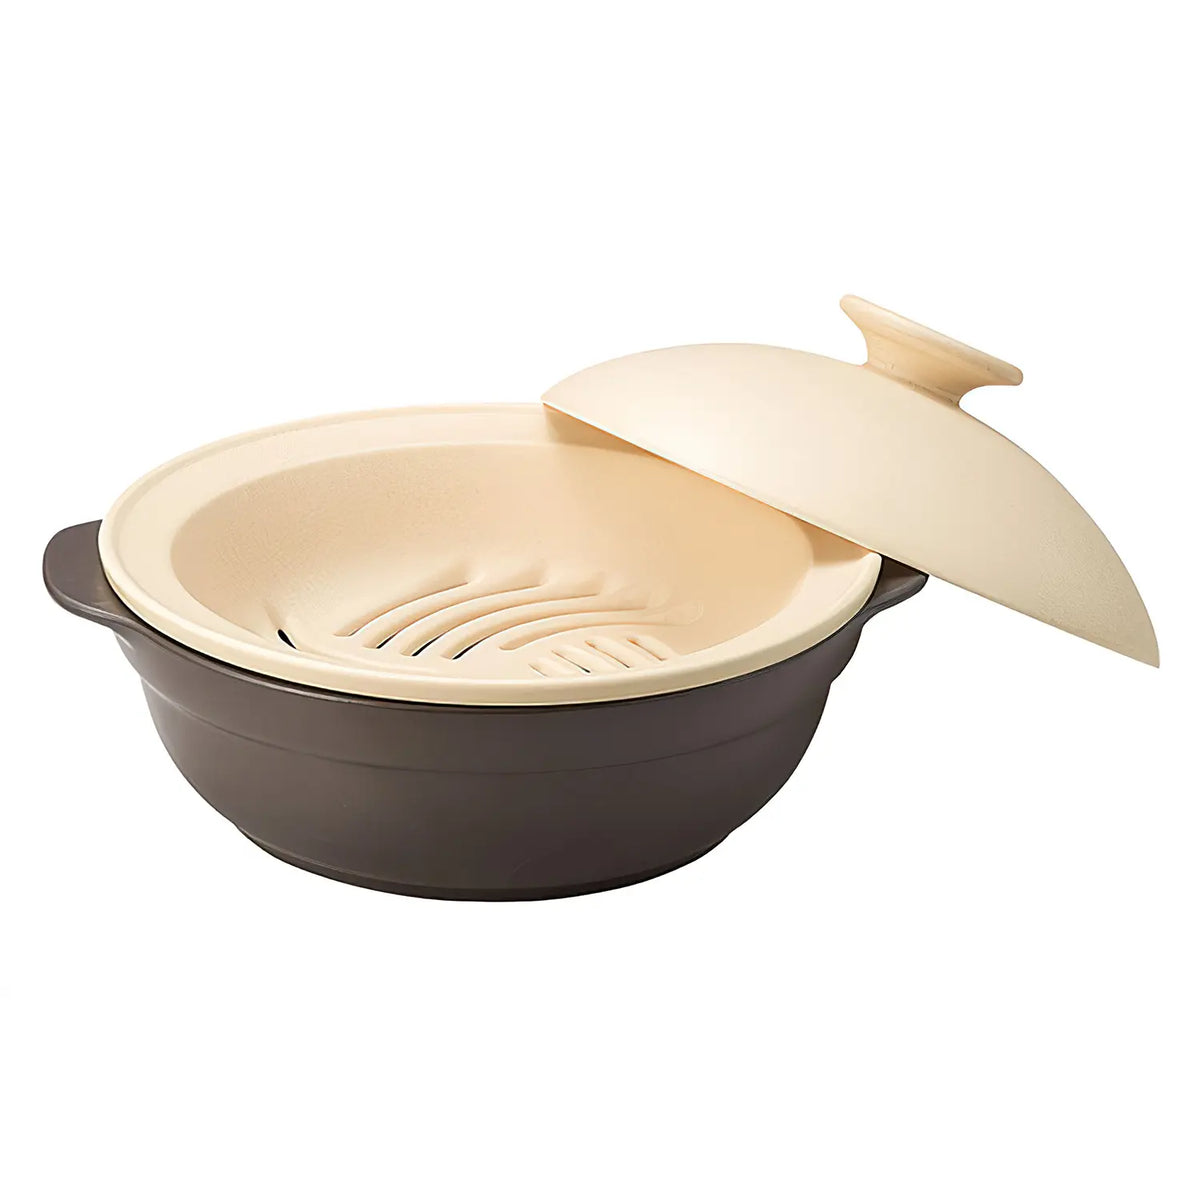 M.STYLE Karl Ceramic Induction Donabe Casserole and Steamer Insert